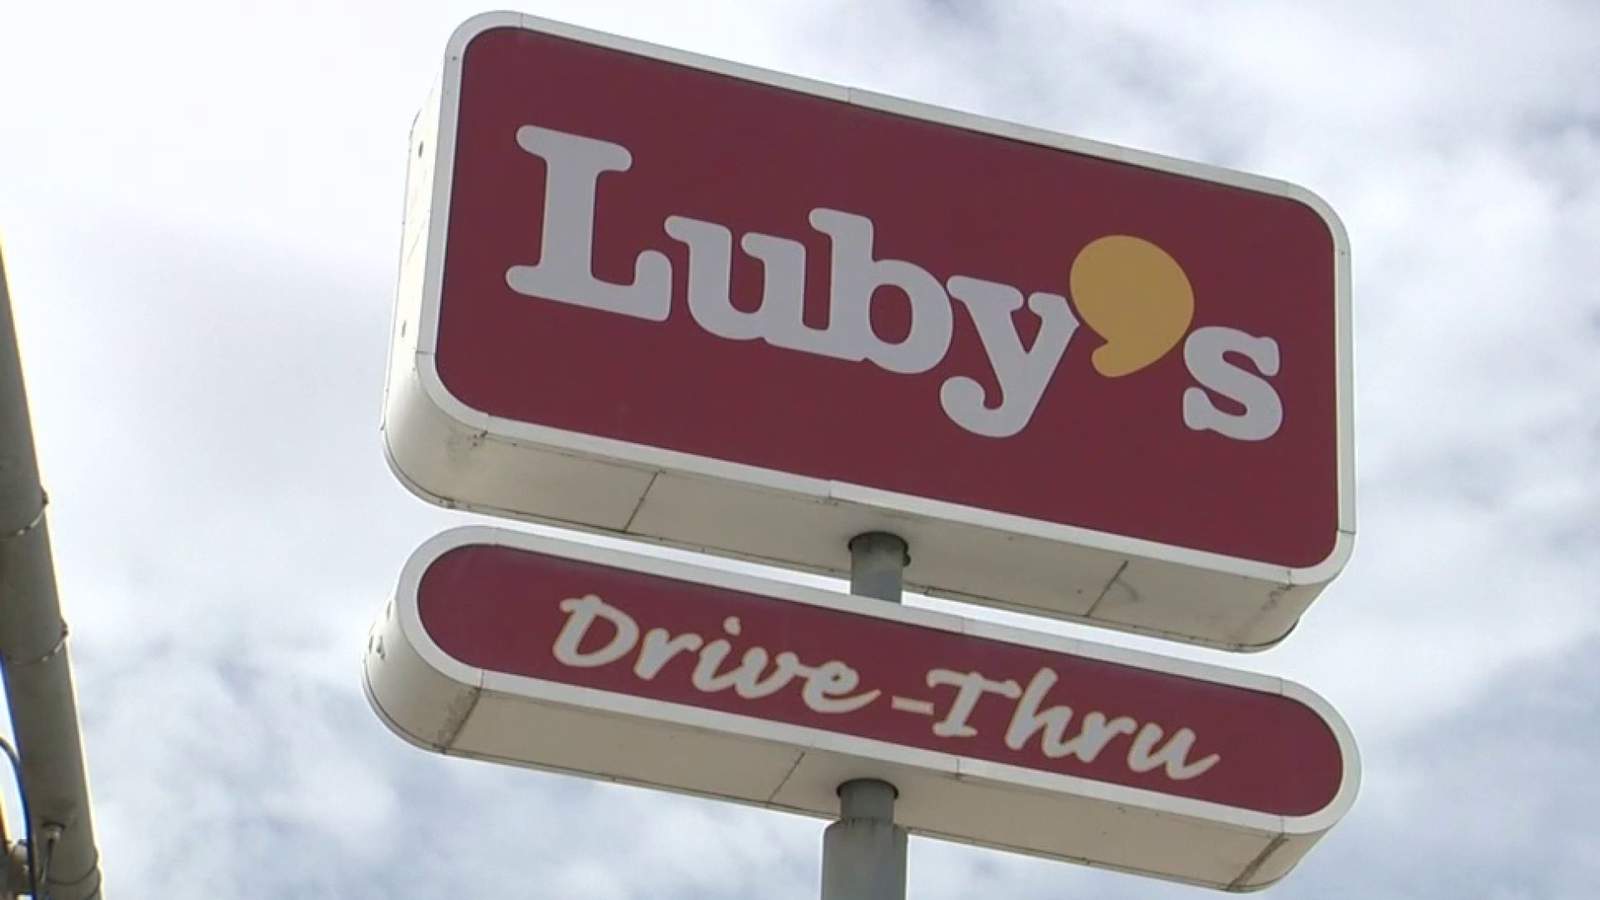 Luby’s expected to close all locations by August